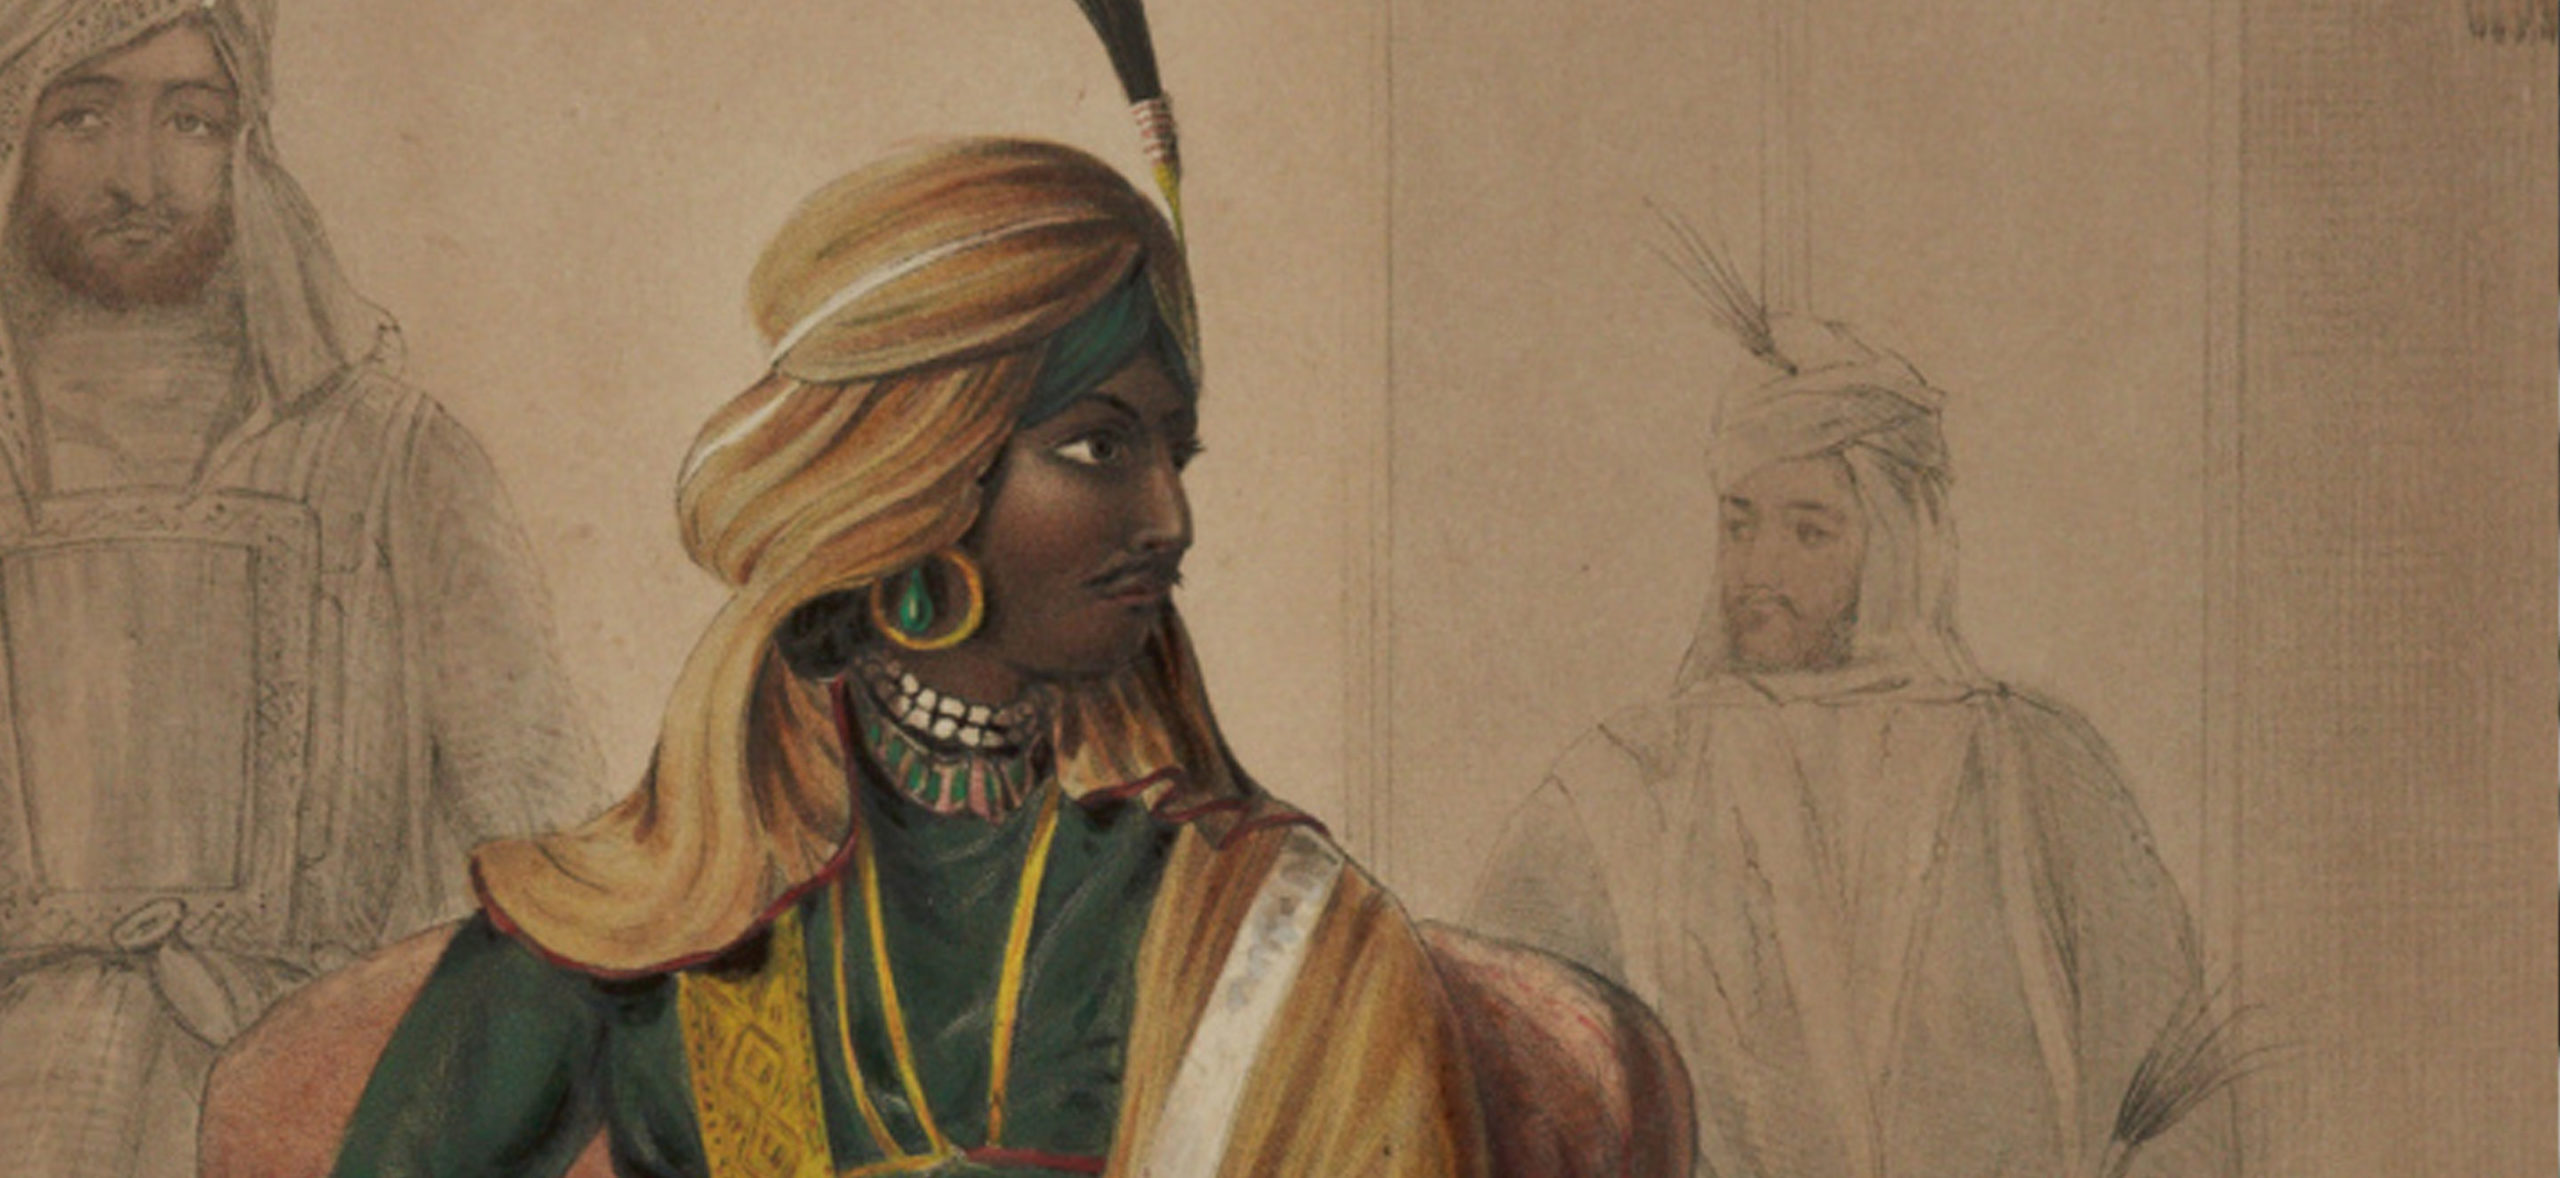 Emily Eden, Rajah Heera Singh (principal chief of the Punjab), 1844. Hand-painted chromolithograph on paper. The Khanuja Family.